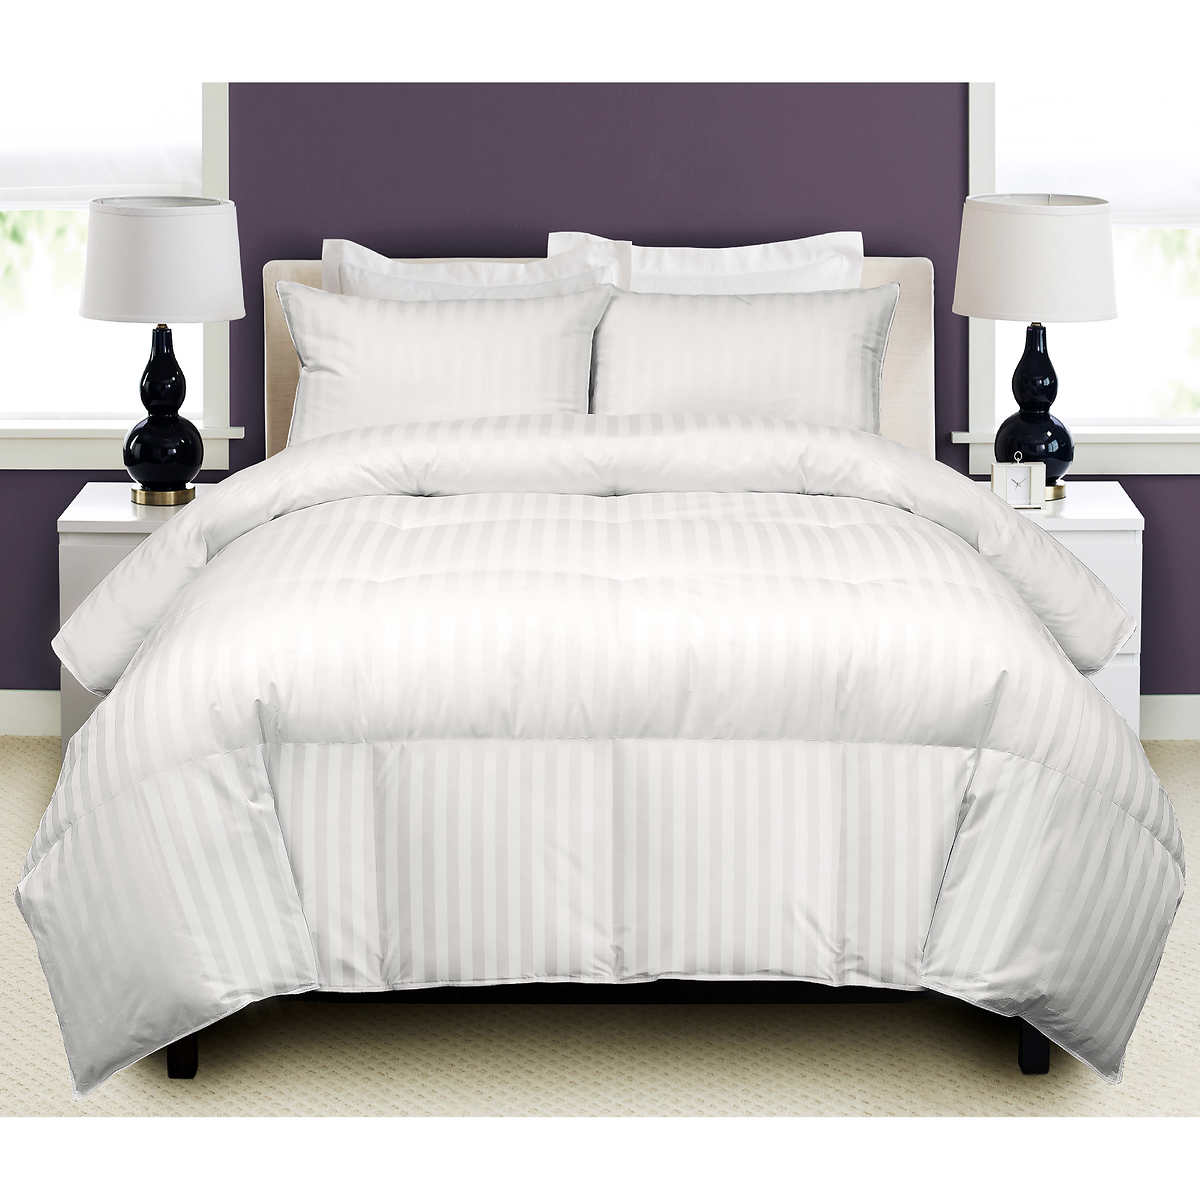 Hotel Grand White Goose Down Comforter, What Is The Lightest Filling For A Duvet